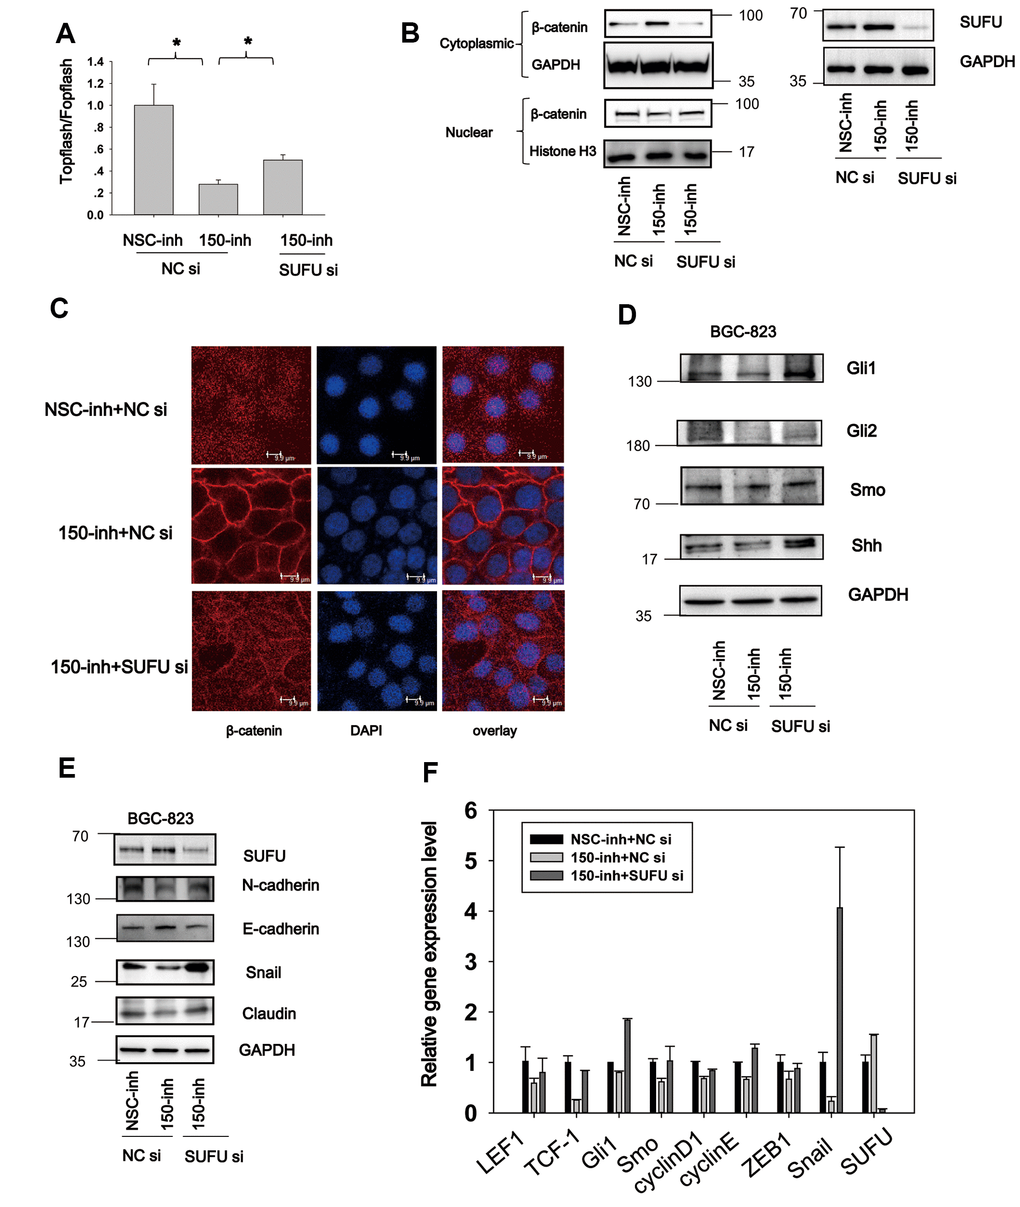 MiRNA-150 induces Hh and Wnt signaling activation and EMT via SUFU. (A) MiRNA-150 inhibition decreased β-catenin-dependent transcriptional activity, and this decrease was reversed by SUFU siRNAs. A TOPFlash/FOPFlash assay was conducted in BGC-823 cells transfected with miRNA-150 inhibitors or co-transfected with 150-inh and SUFU siRNAs. (B, C) Interference of SUFU alleviated the β-catenin cytoplasmic translocation induced by miRNA-150 inhibition. (B) β-catenin expression was detected in the cytoplasm and nucleus. (C) Confocal immunostaining of β-catenin was performed to visualize the cytoplasmic or nuclear localization of β-catenin. (D, E) MiRNA-150 inhibitors reduced the expression of Hh signaling genes and EMT markers, and SUFU siRNA rescued this inhibitory effect. The expression of Hh signaling and EMT proteins was detected in BGC-823 cells by western blotting after transfection with miRNA-150 inhibitors or co-transfection with 150-inh and SUFU siRNAs. (F) The mRNA levels of some Hh-, Wnt- and EMT-related genes were reduced under miRNA-150 inhibition, but increased somewhat after SUFU gene knockdown. *p